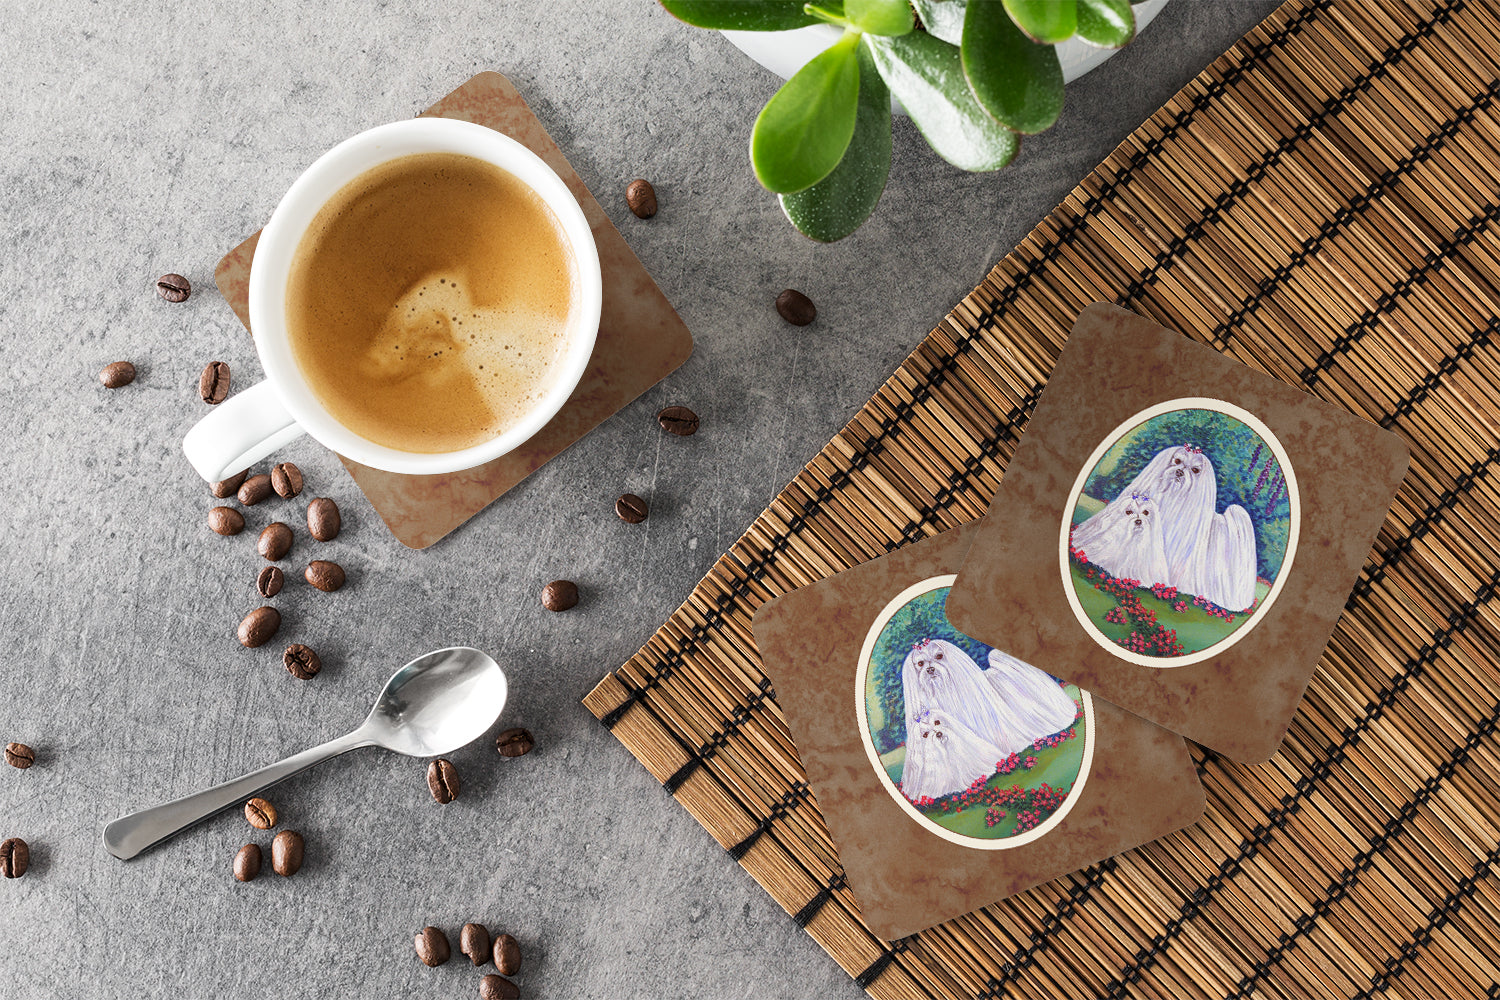 Maltese Momma and Puppy Foam Coaster Set of 4 7104FC - the-store.com